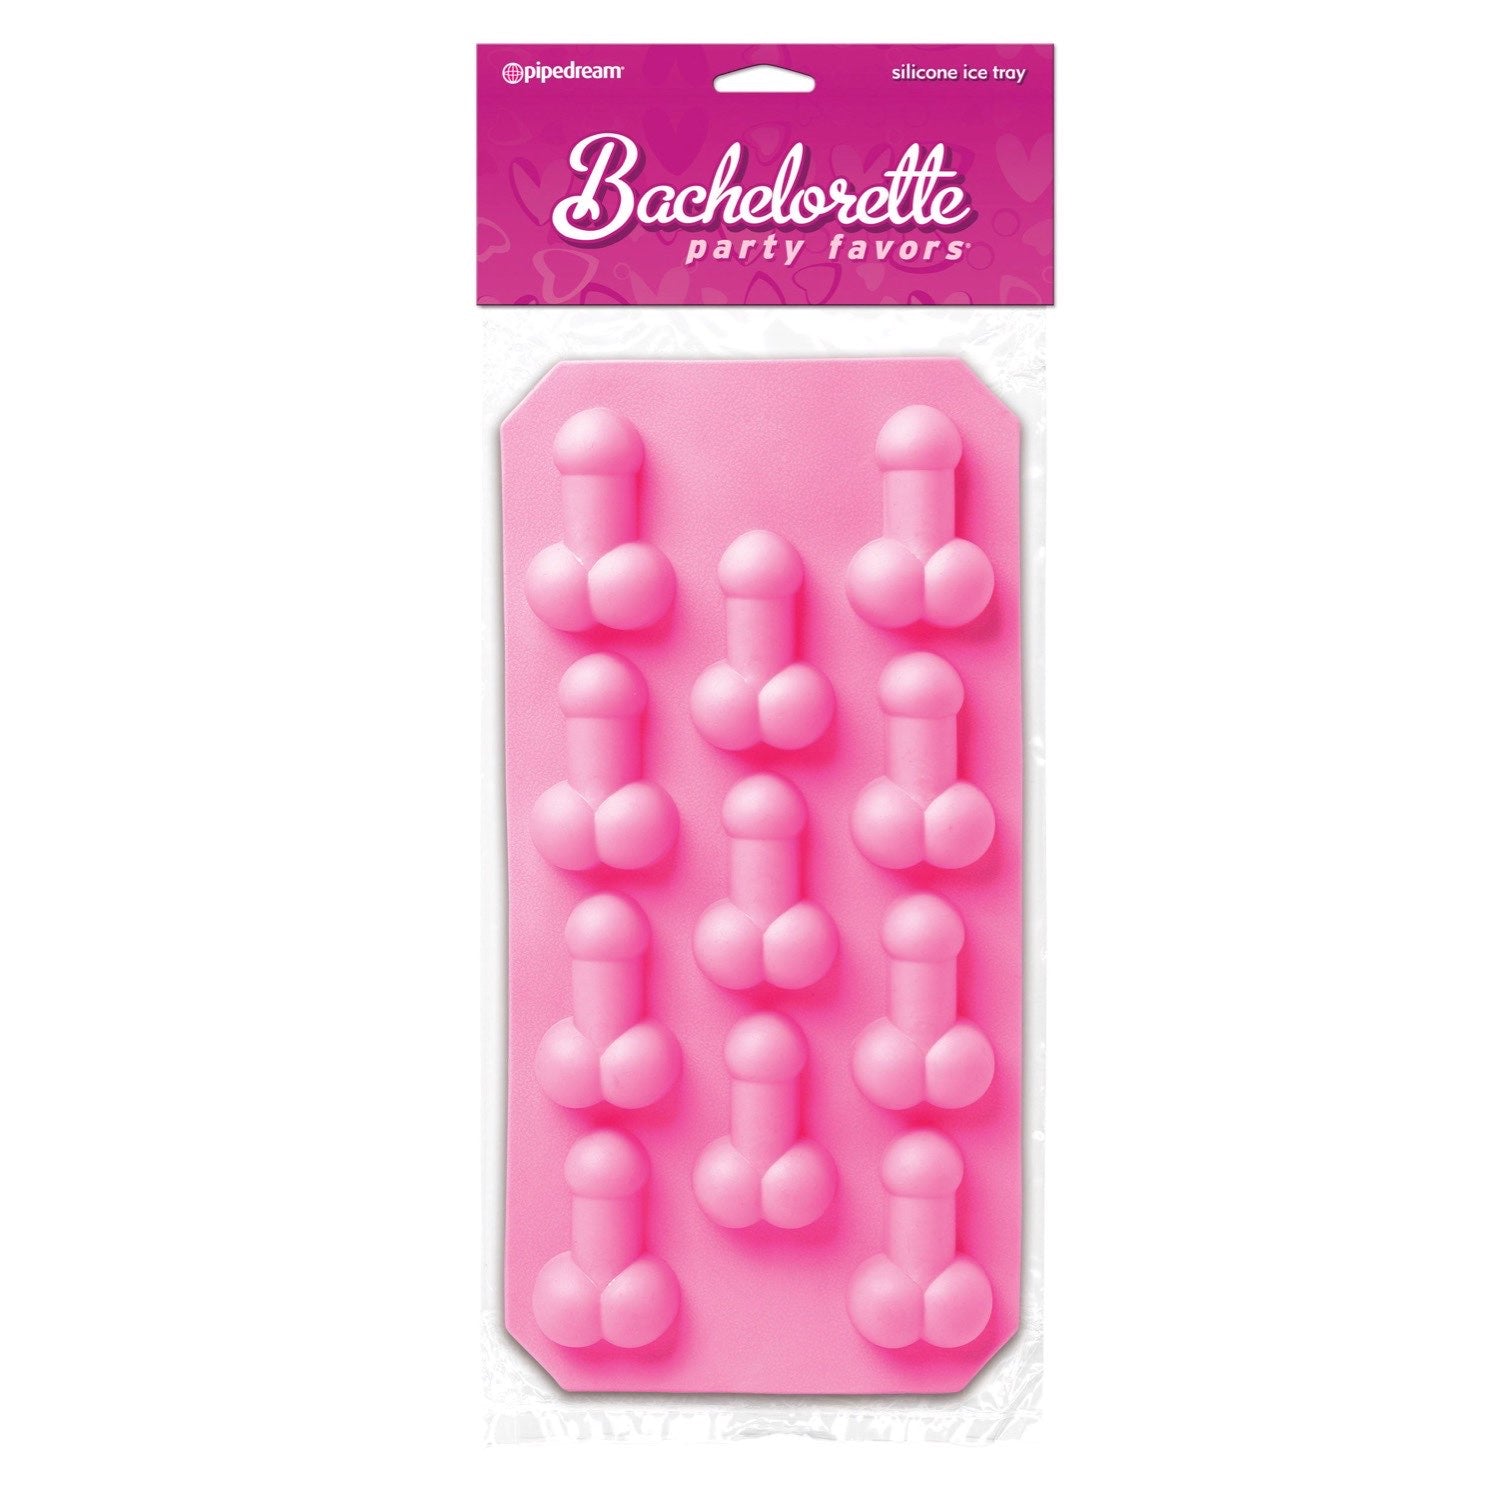 Bachelorette Party Favors Silicone Penis Ice Tray - Pink Silicone Ice Tray by Pipedream